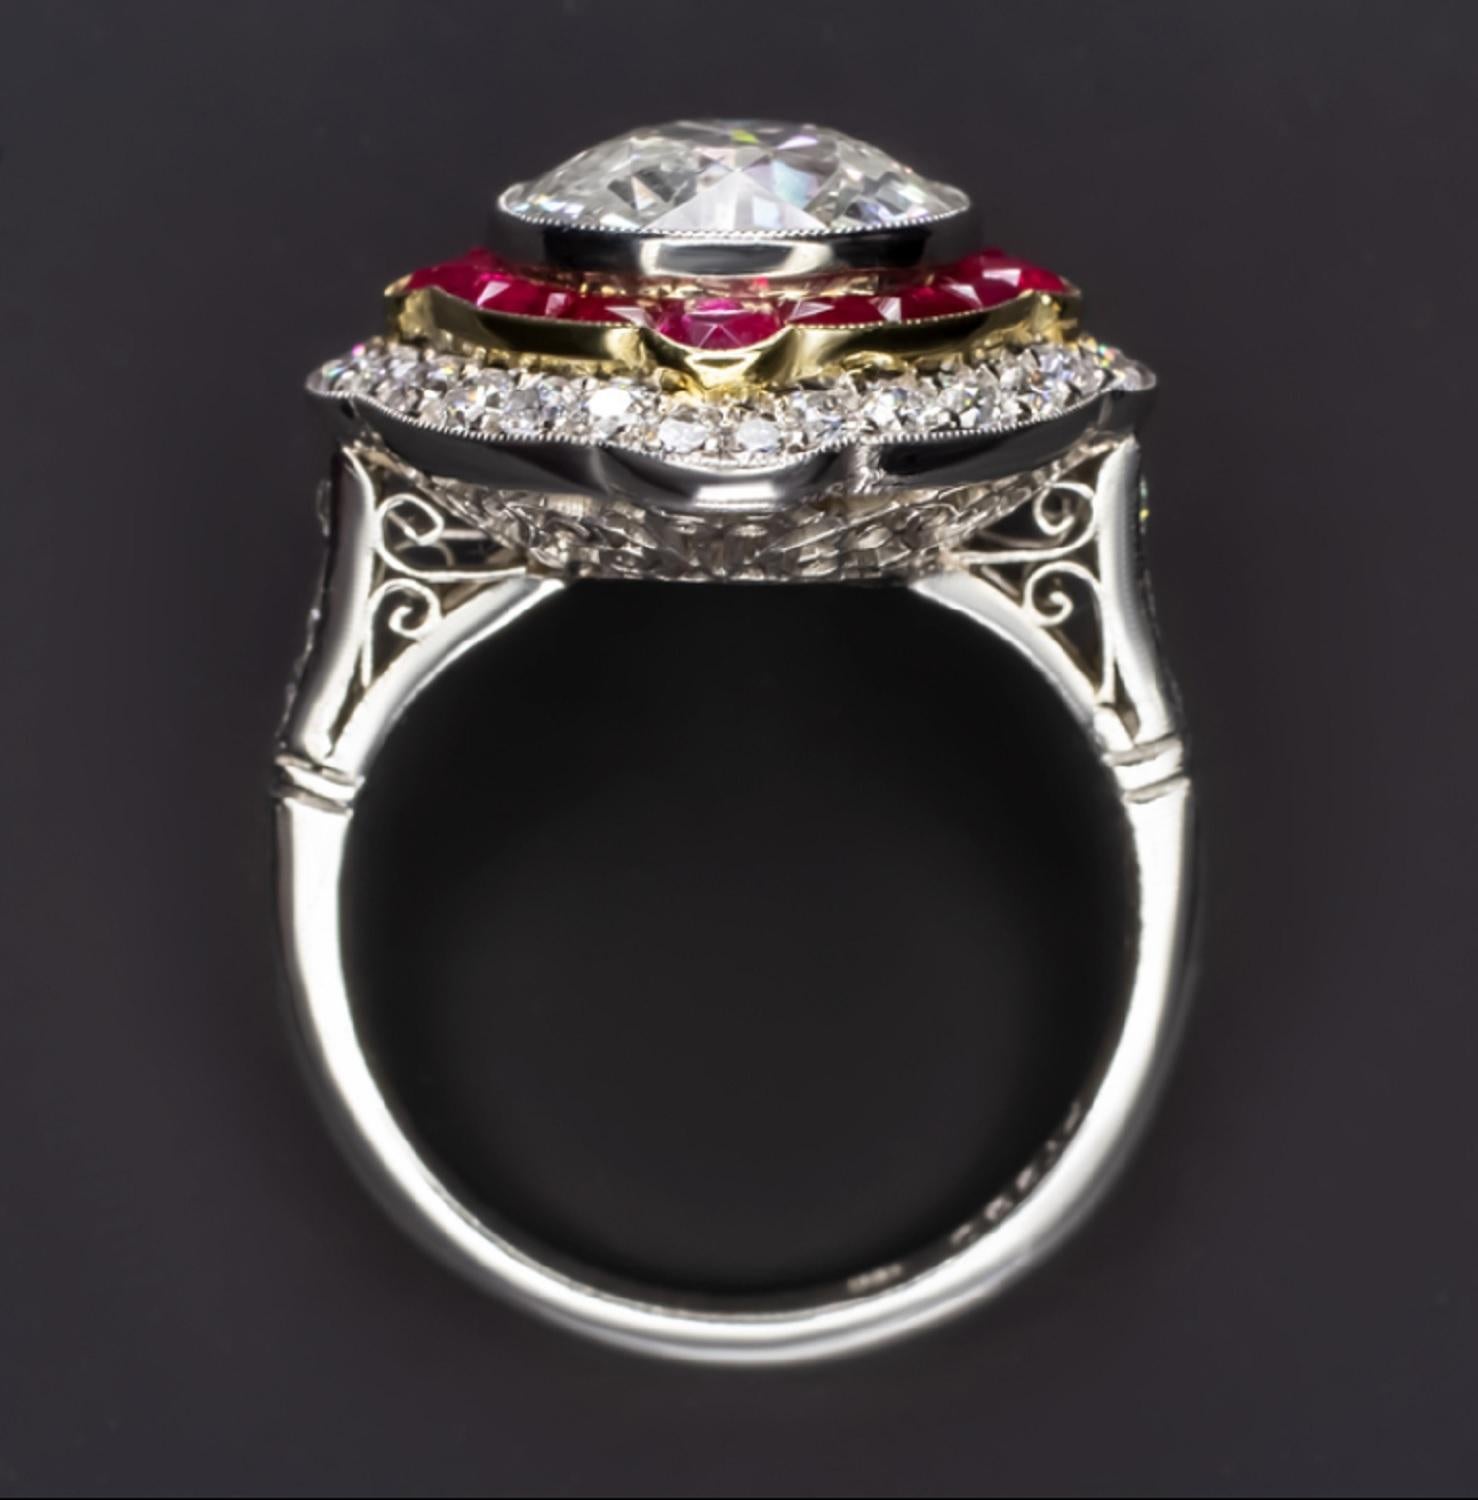 Old European Cut EGL Certified Authentic Art Deco 4 Carat Old Diamond Rubies Cocktail Ring